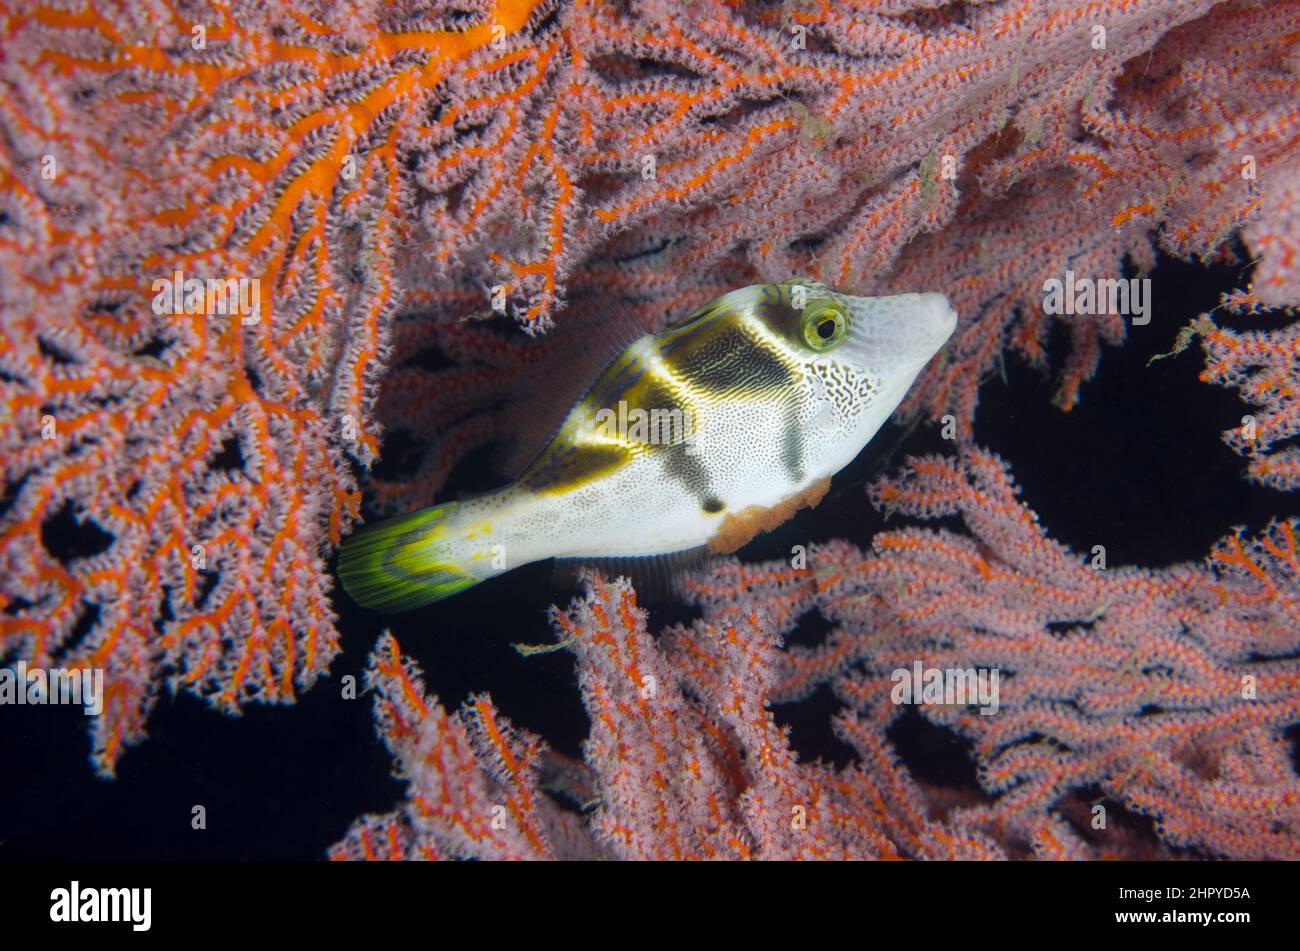 Mimic Filefish (Paraluteres prionurus) which mimics the highly poisonous pufferfish Saddled Puffer (Canthigaster valentini) by Sea Fan (Melithaea sp), Stock Photo